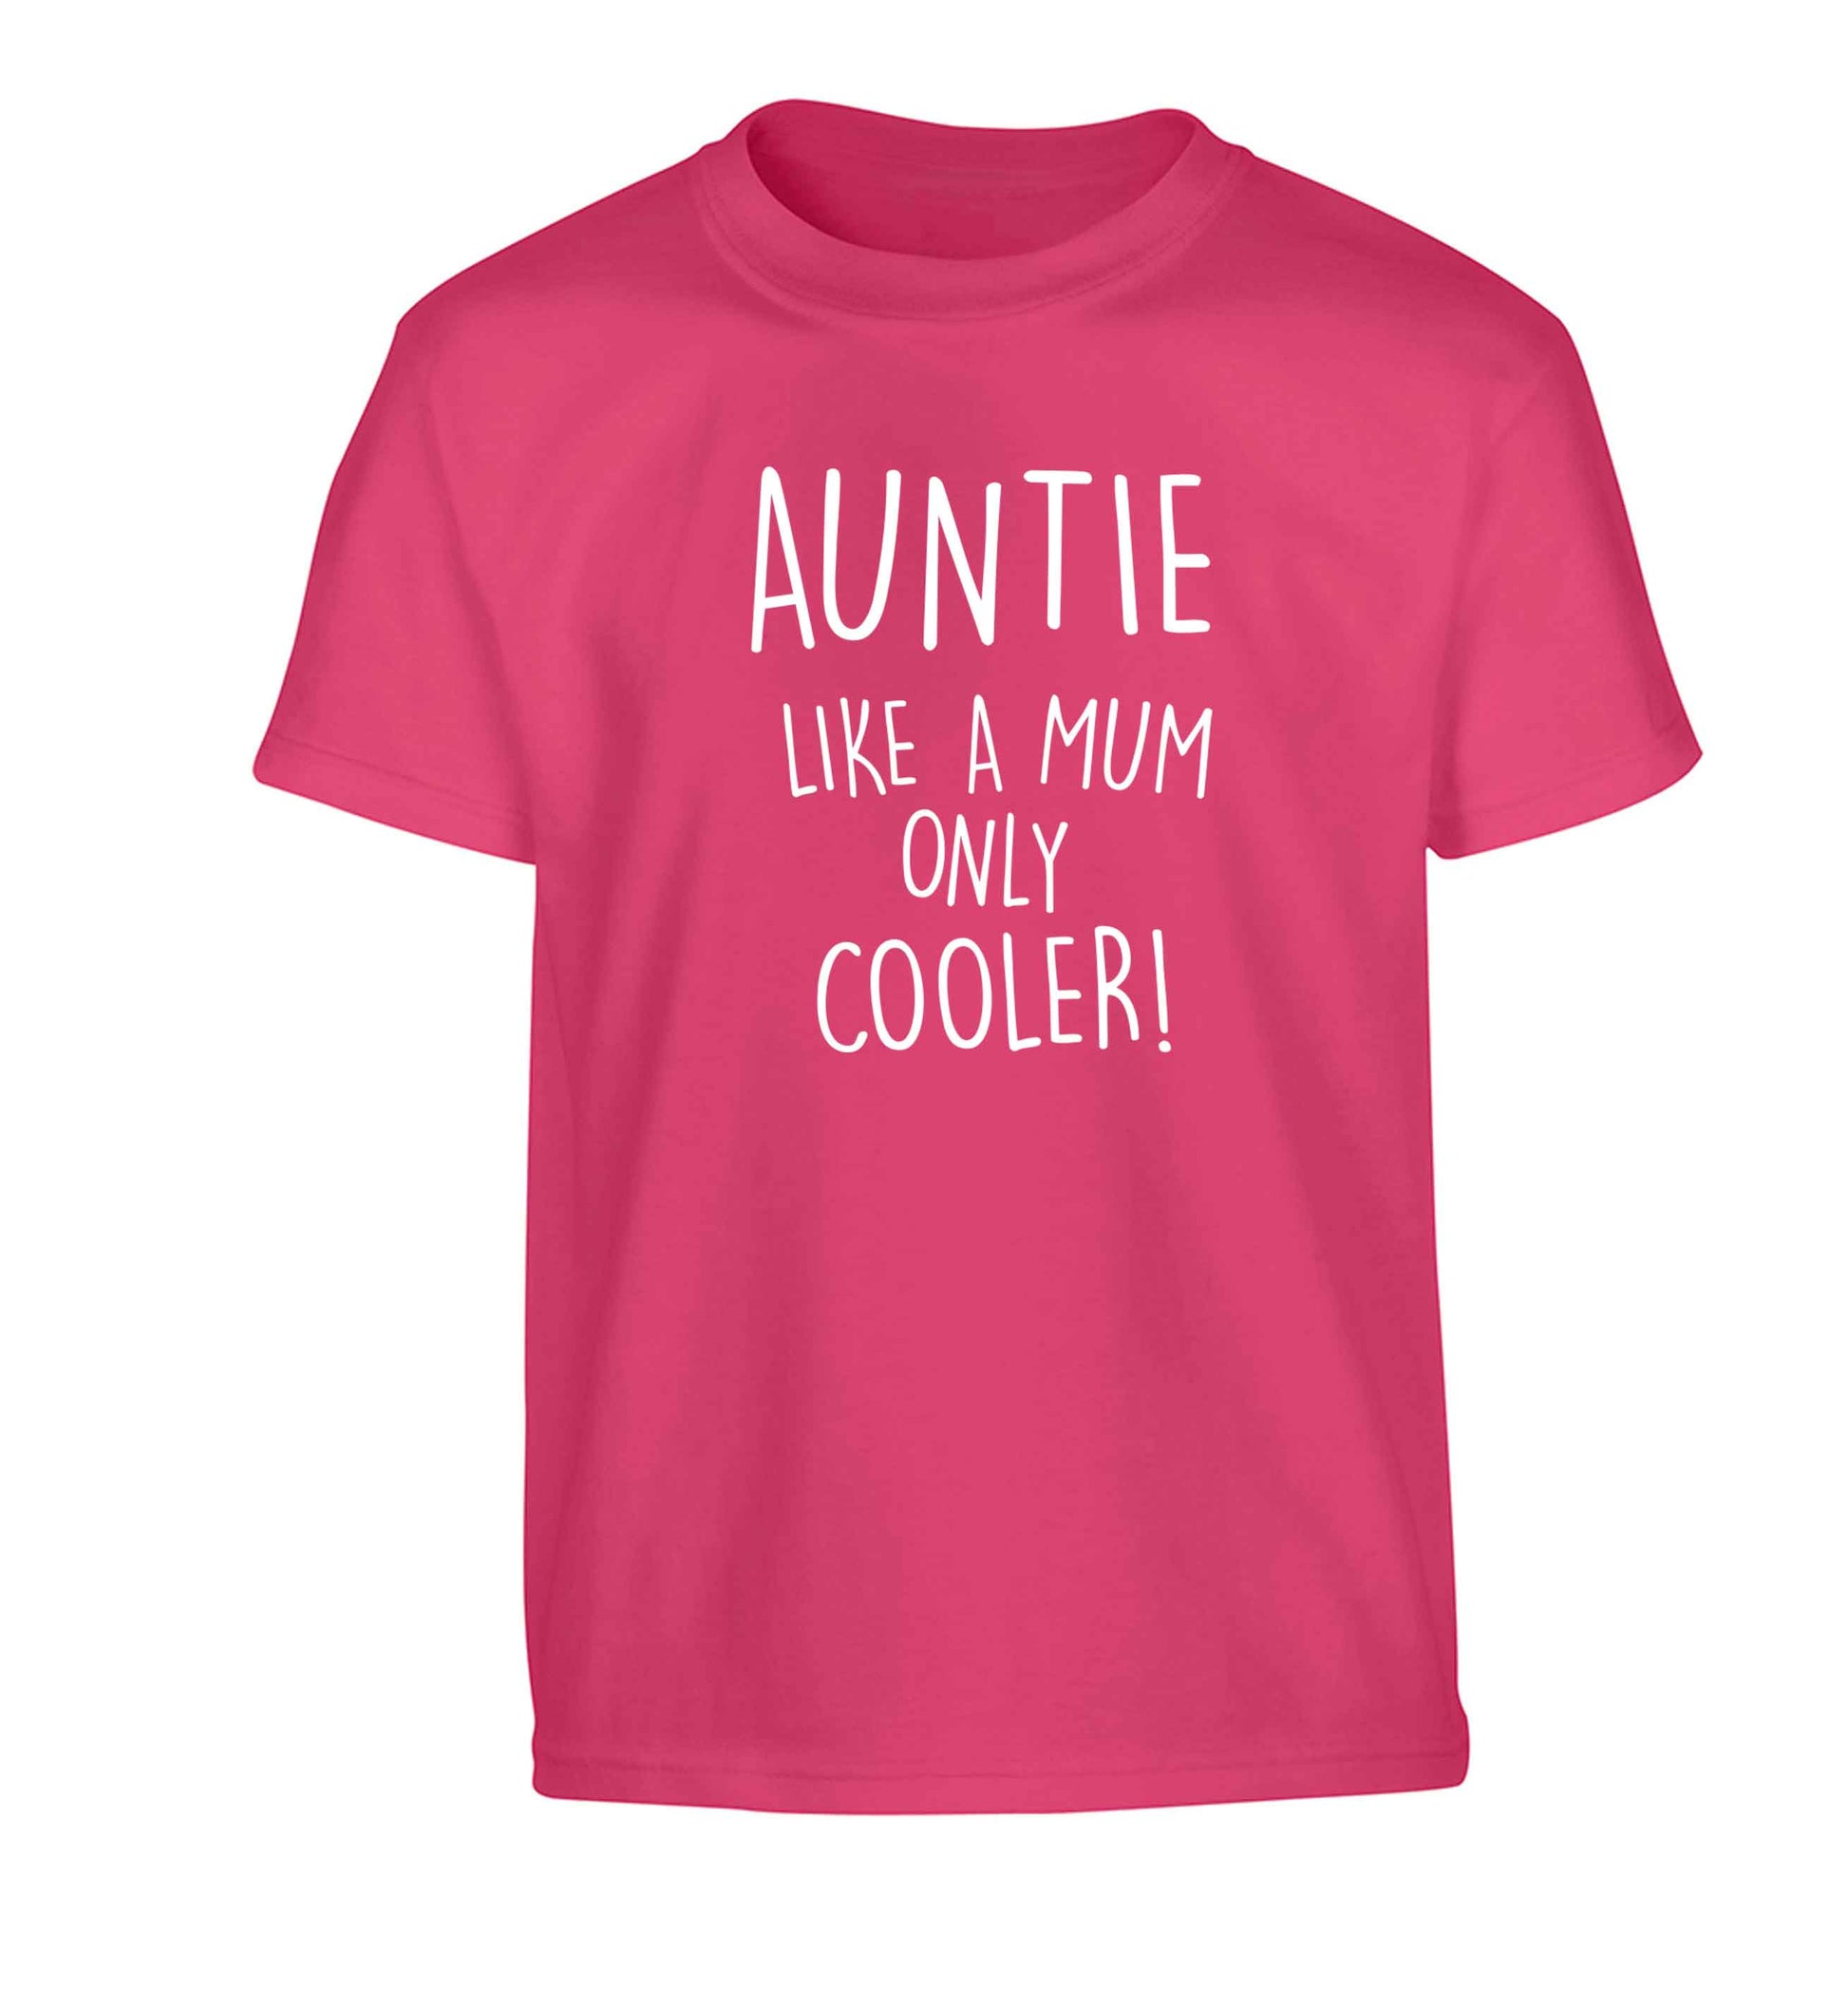 Auntie like a mum only cooler Children's pink Tshirt 12-13 Years